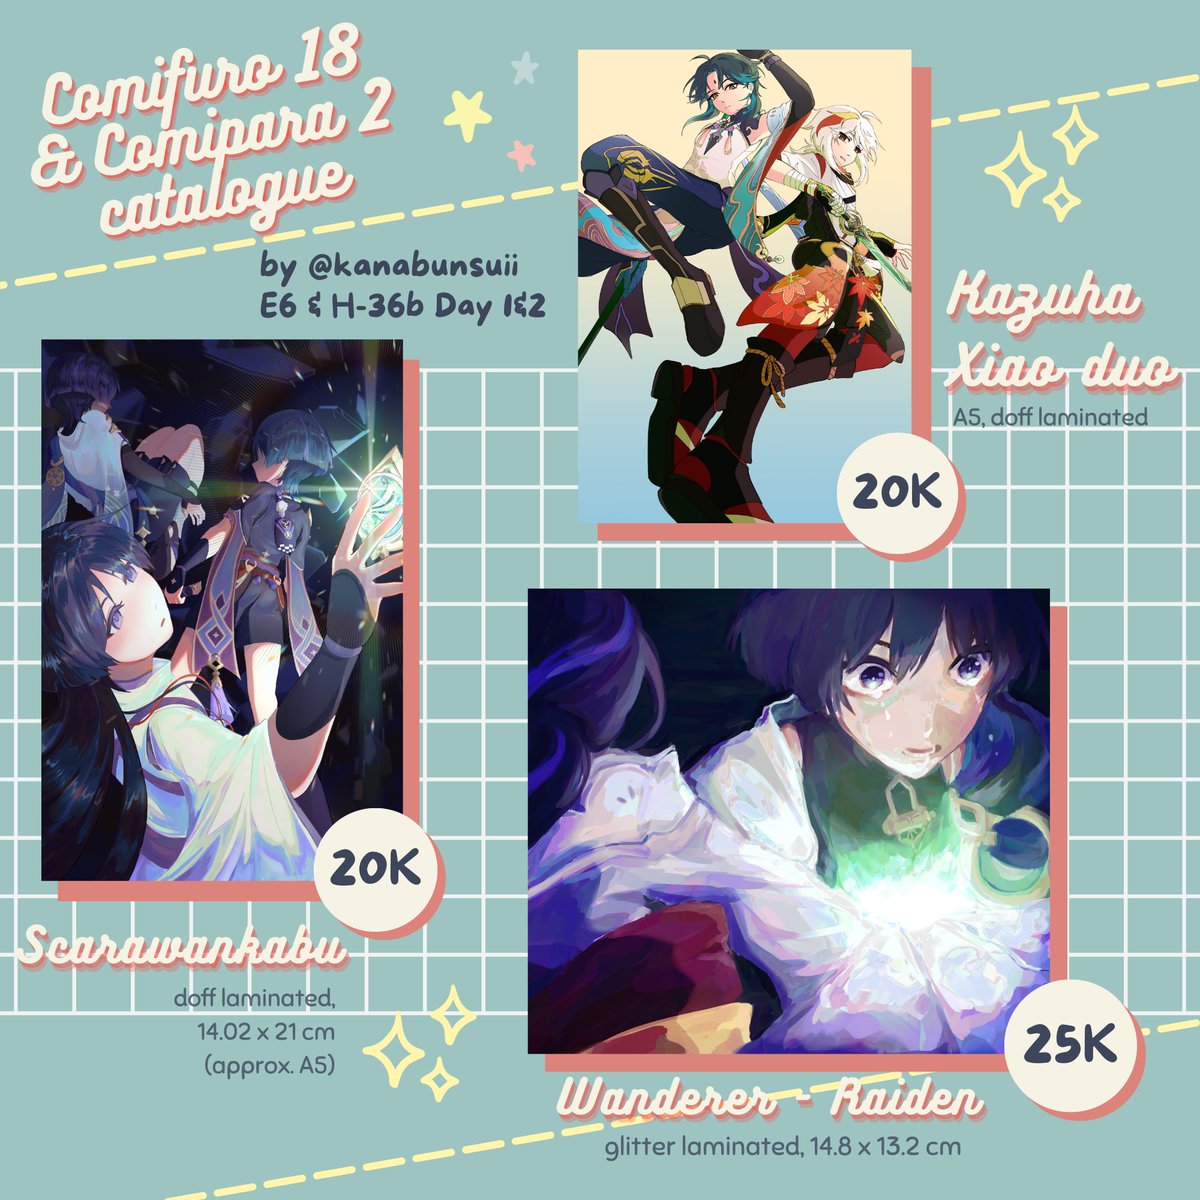 RT and shares are appreciated!🌟 Hihii I'm opening PO for #CF18 and #comipara2 ! Here's my catalogue, have a peek~ 📅: 14 - 21 April 🪧: Booth H36b (CF) & E6 (Comipara) 💌: pick up OTS only 🔗: forms.gle/sS5wCWDr2wKrmz… #comipara #comifuro18 #comifuro18catalogue